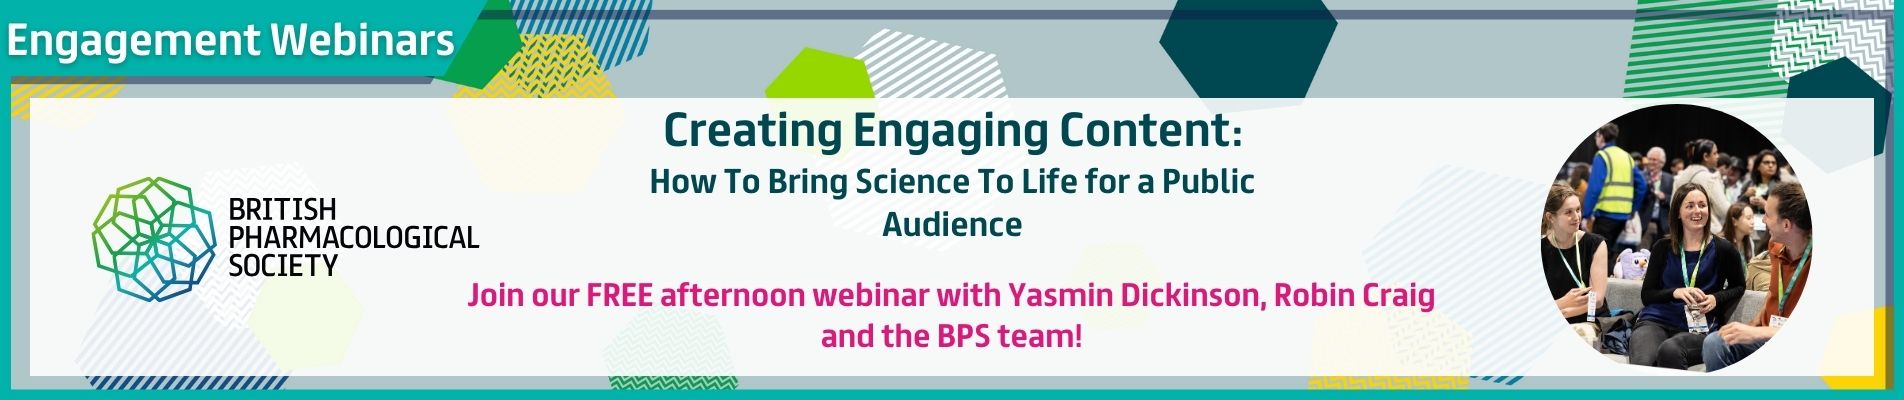 Creating Engaging Content: How to Bring Science to Life for a Public Audience